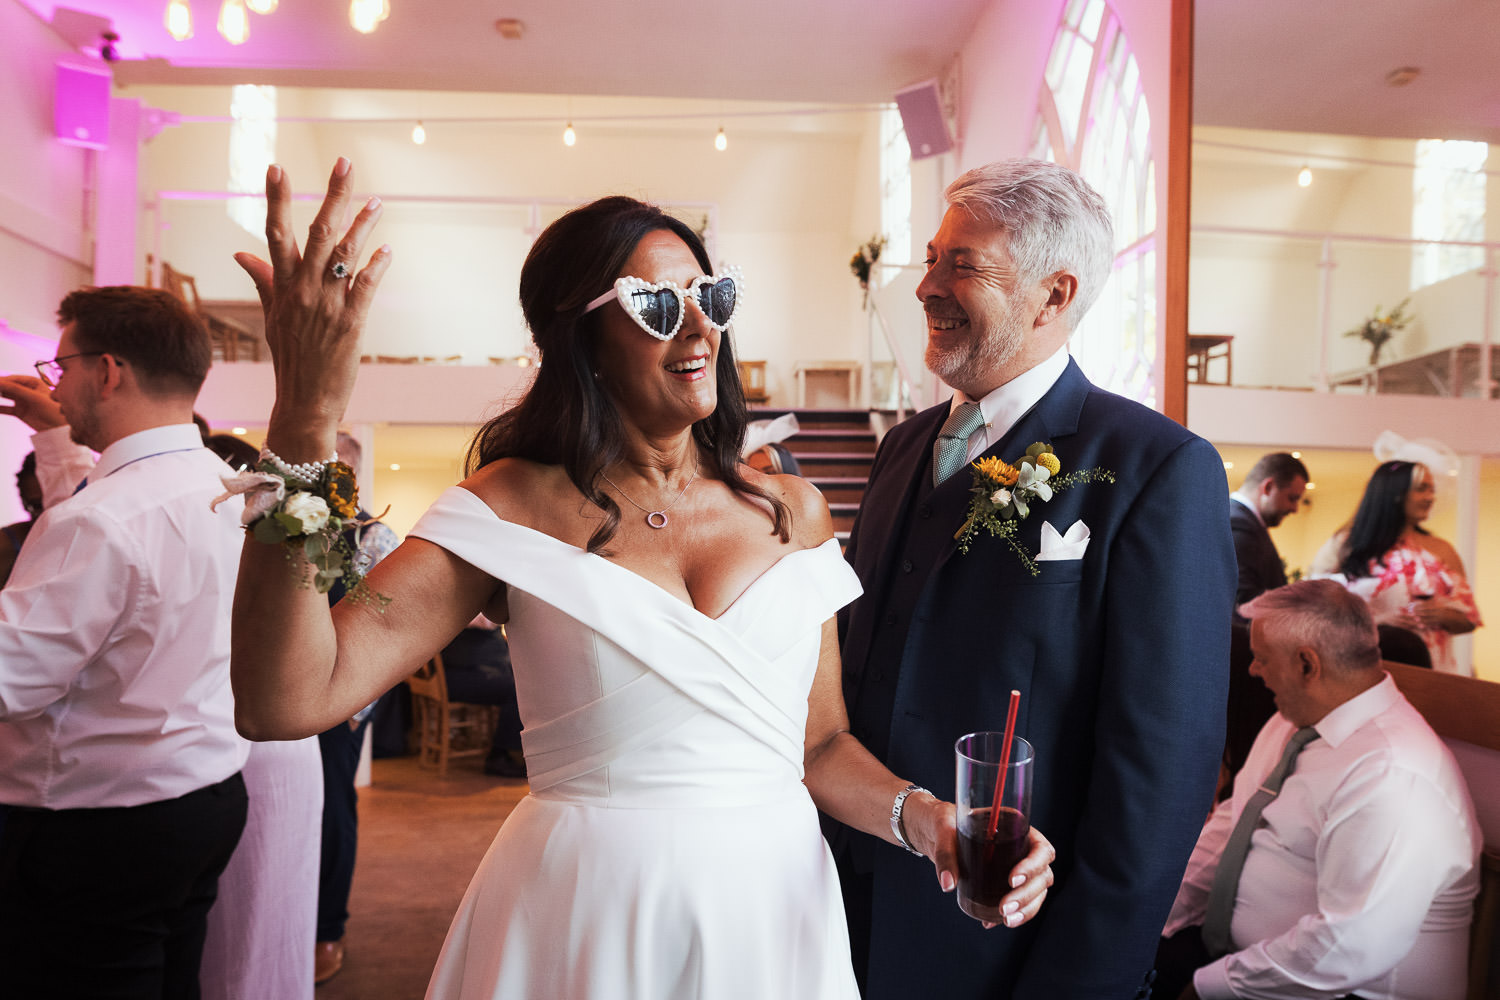 New wife wearing off-the-shoulder Ivory dress with pockets by Justin Alexander called Denley. Sunglasses and holding a drink, holding other hand in the air as her husband in a navy suit smiles. The Old Parish Rooms wedding photography.